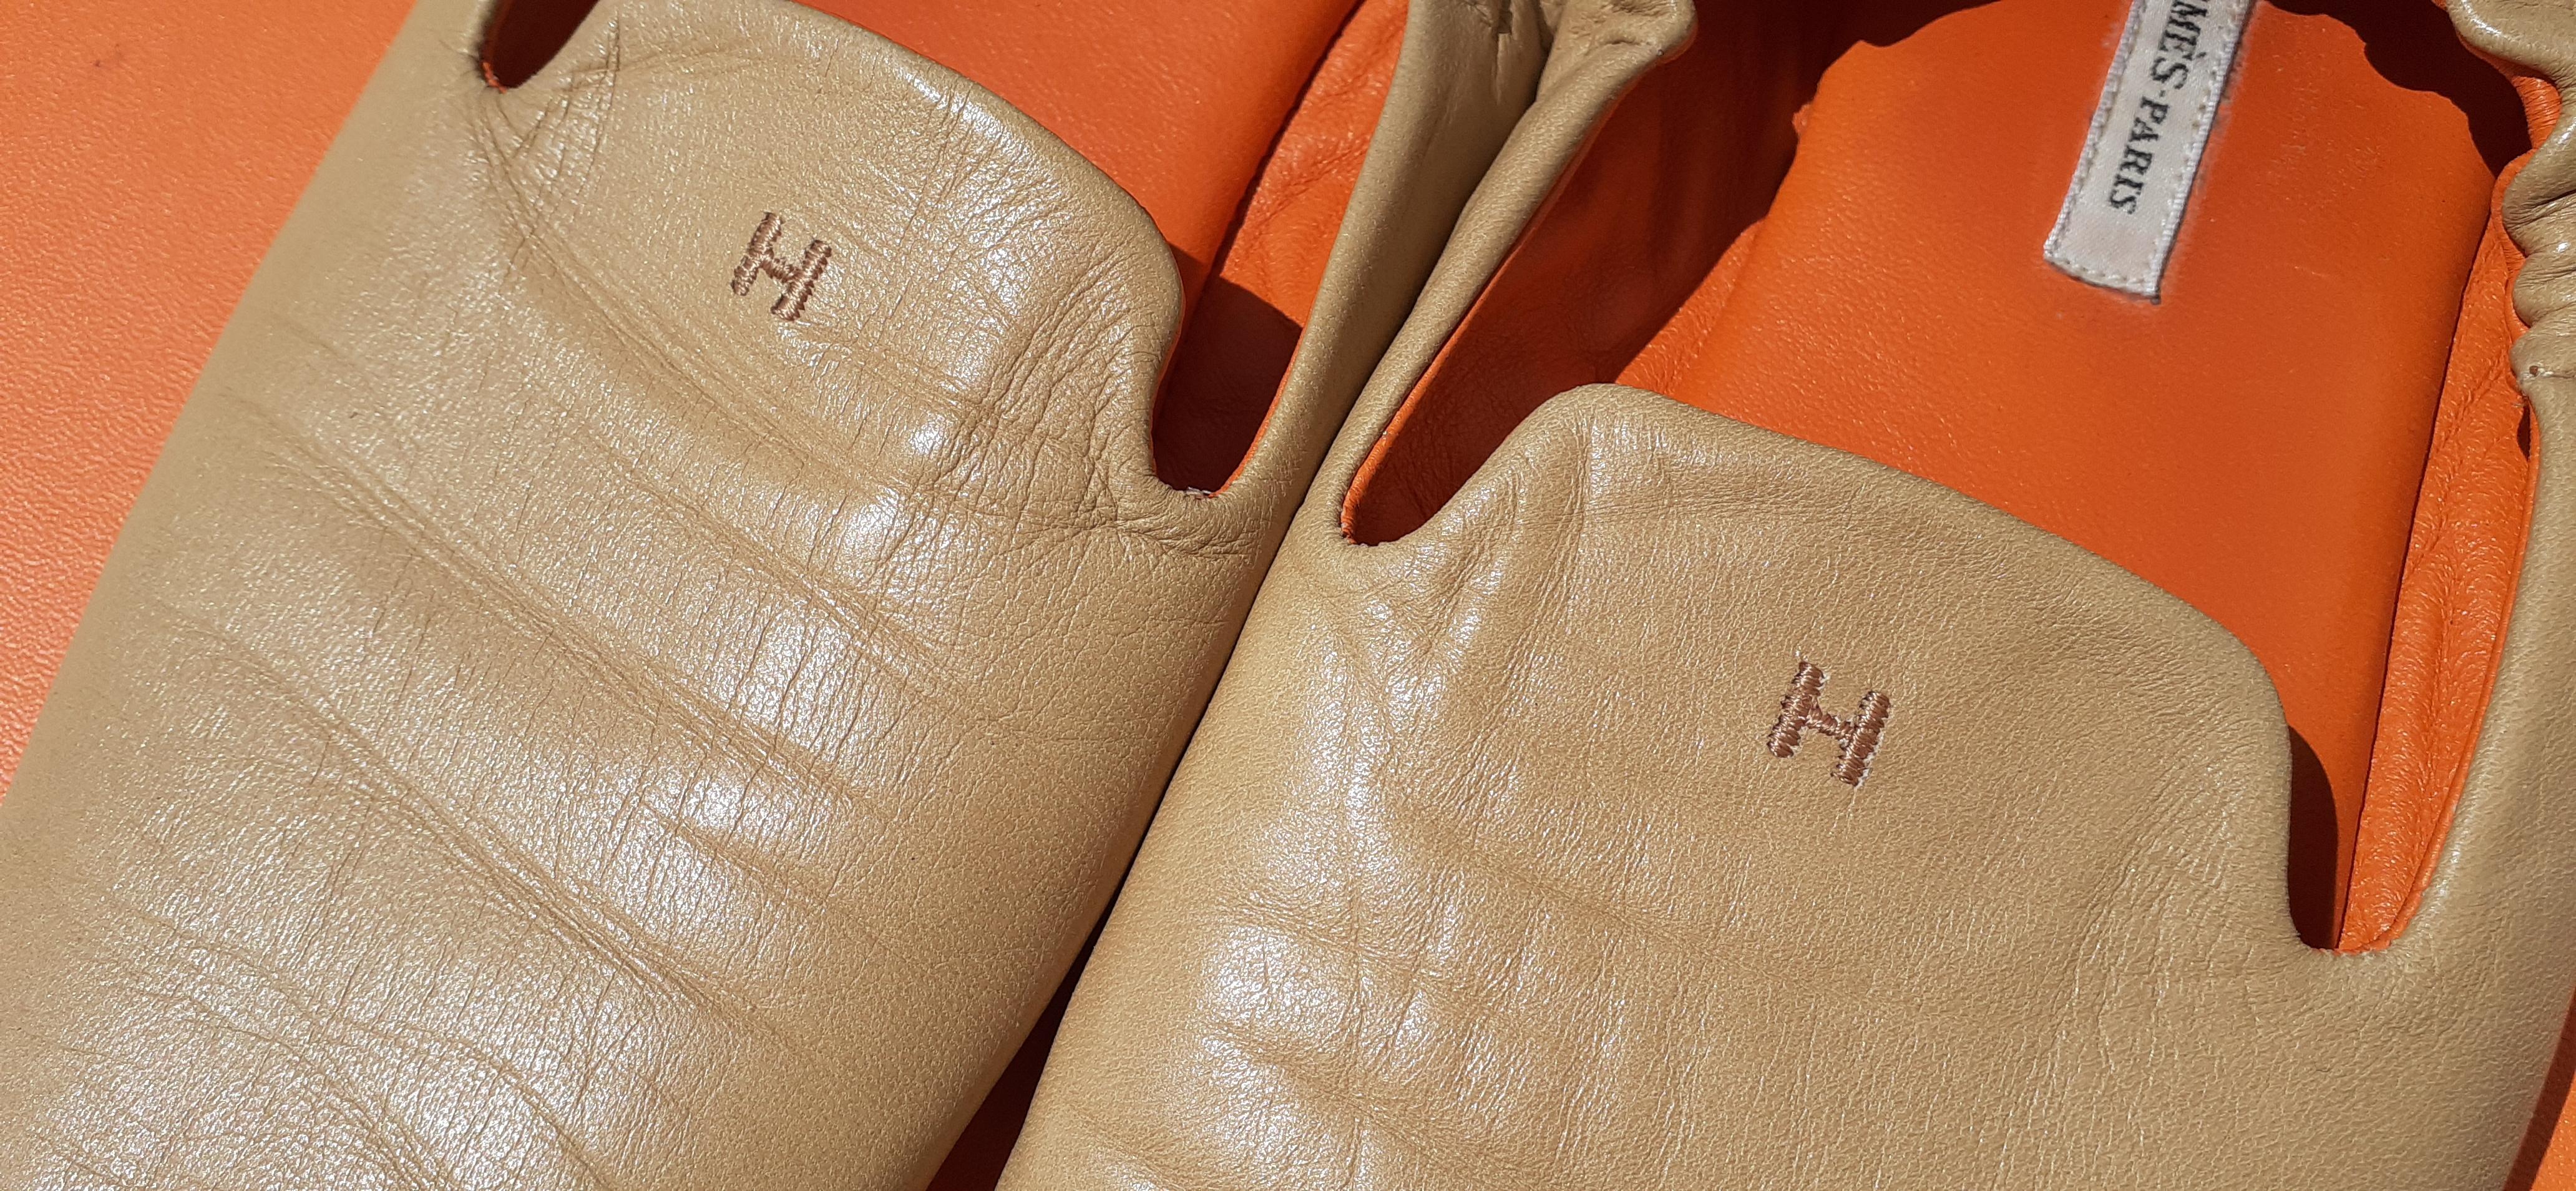 Beautiful Hermès Slippers

Super comfortable

Made of Lambskin Smooth Leather and Suede Outsole

Inside is lined with orange smooth Leather

The back of the slippers is elasticated providing a perfect support

Made in Spain

